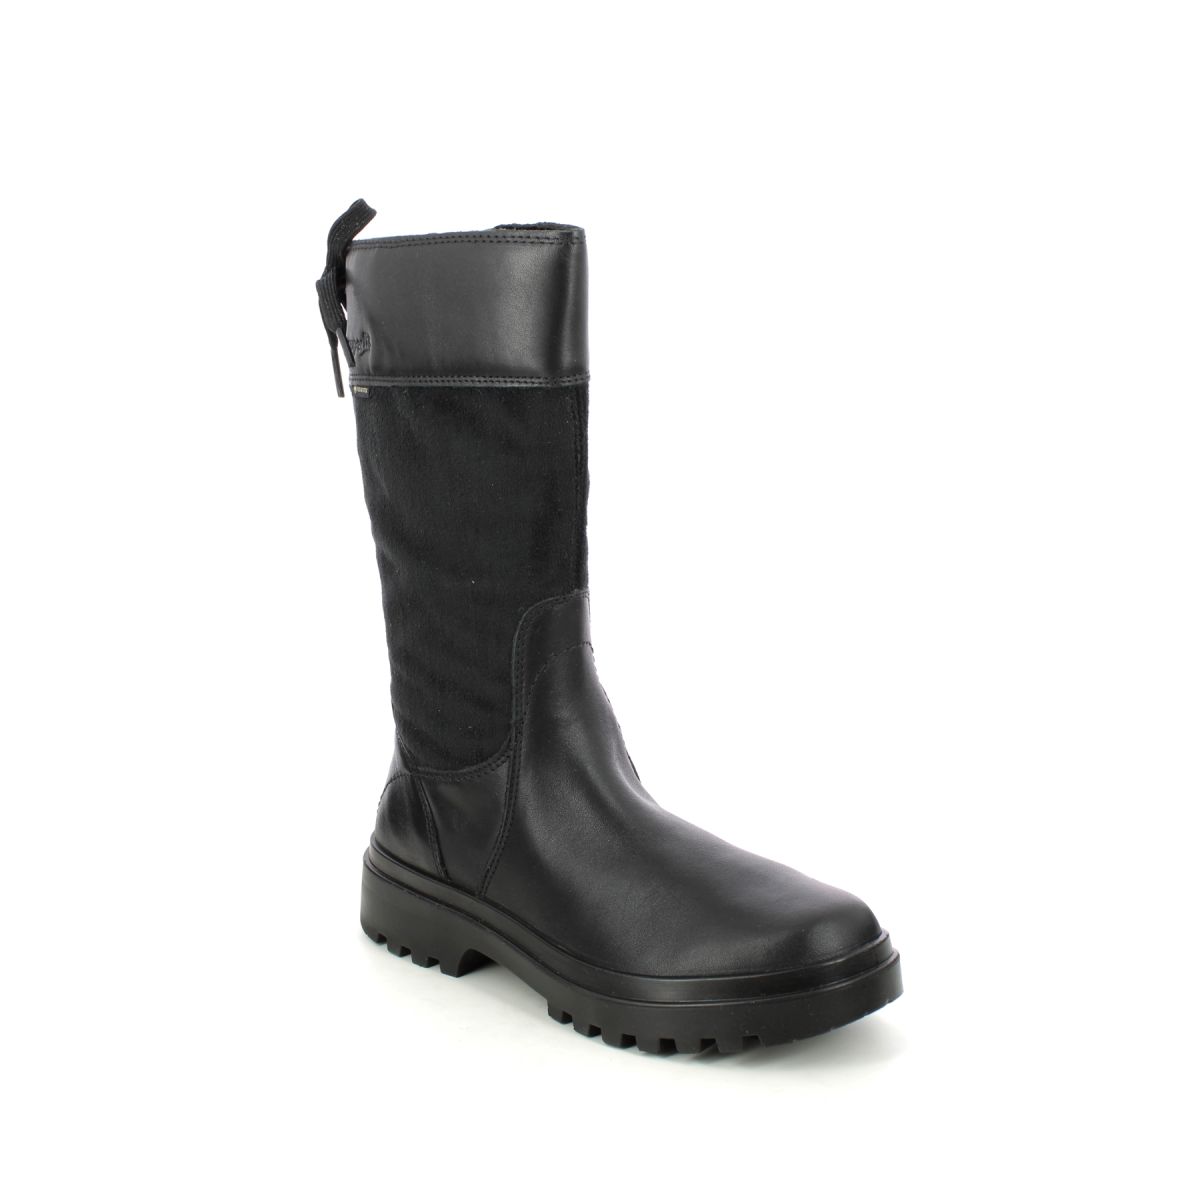 Superfit Abby Long Gtx Black leather Kids Girls boots 1000605-0000 in a Plain Leather in Size 38